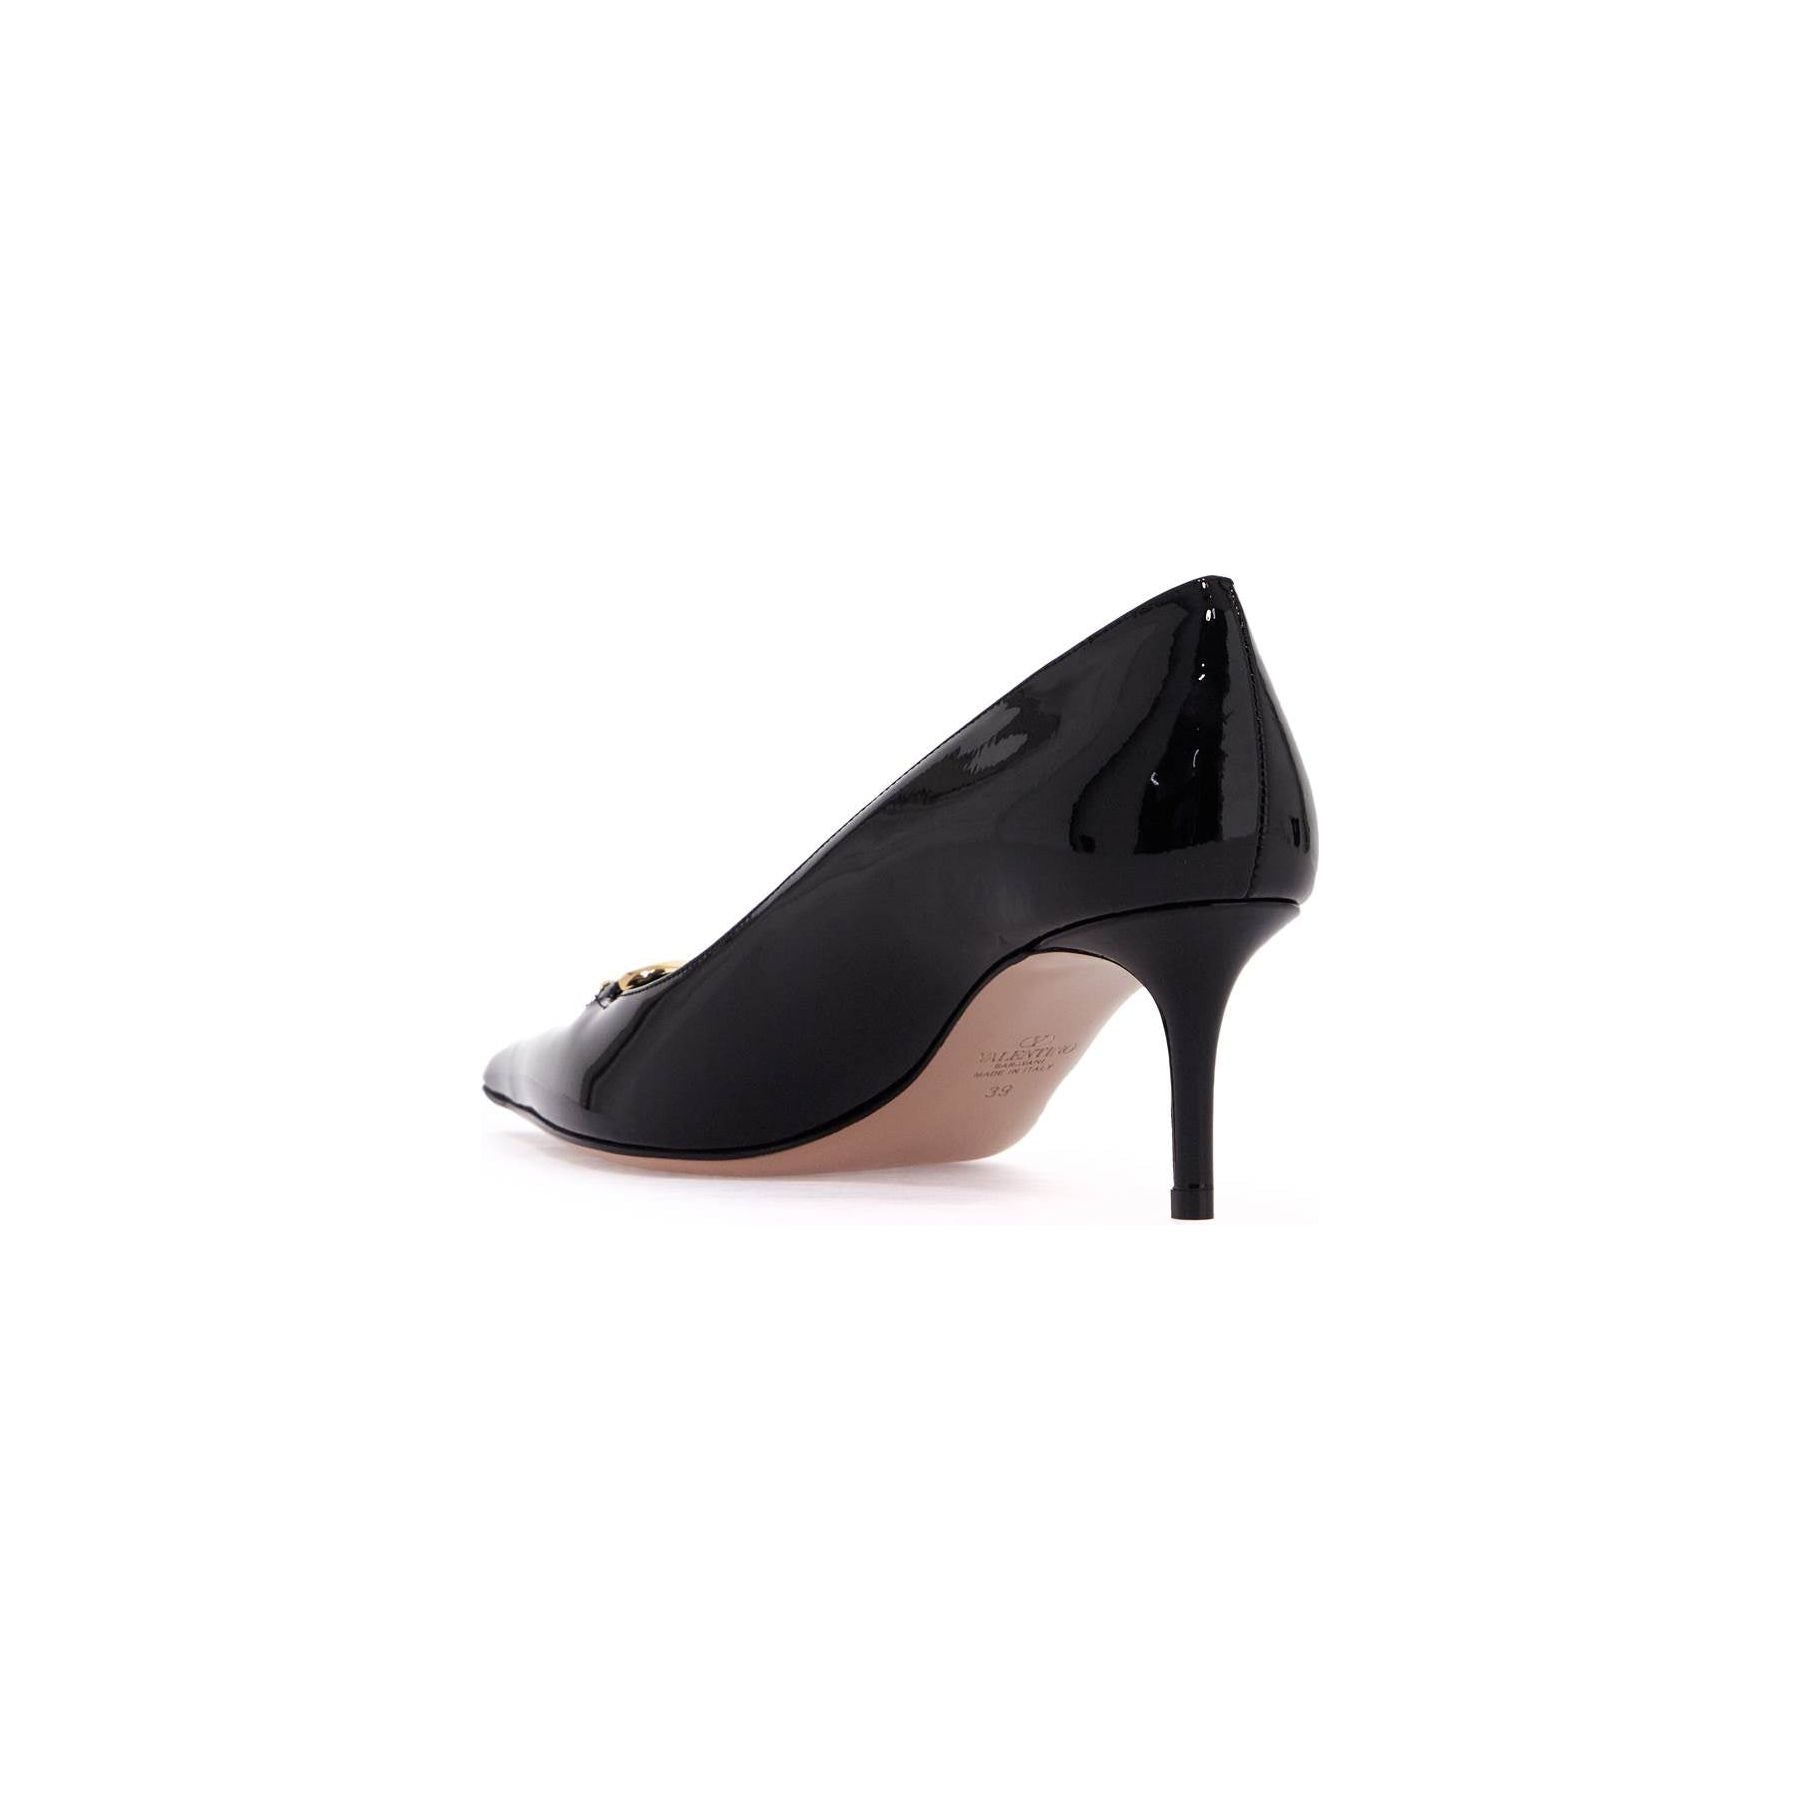 VLogo The Bold Edition Pumps